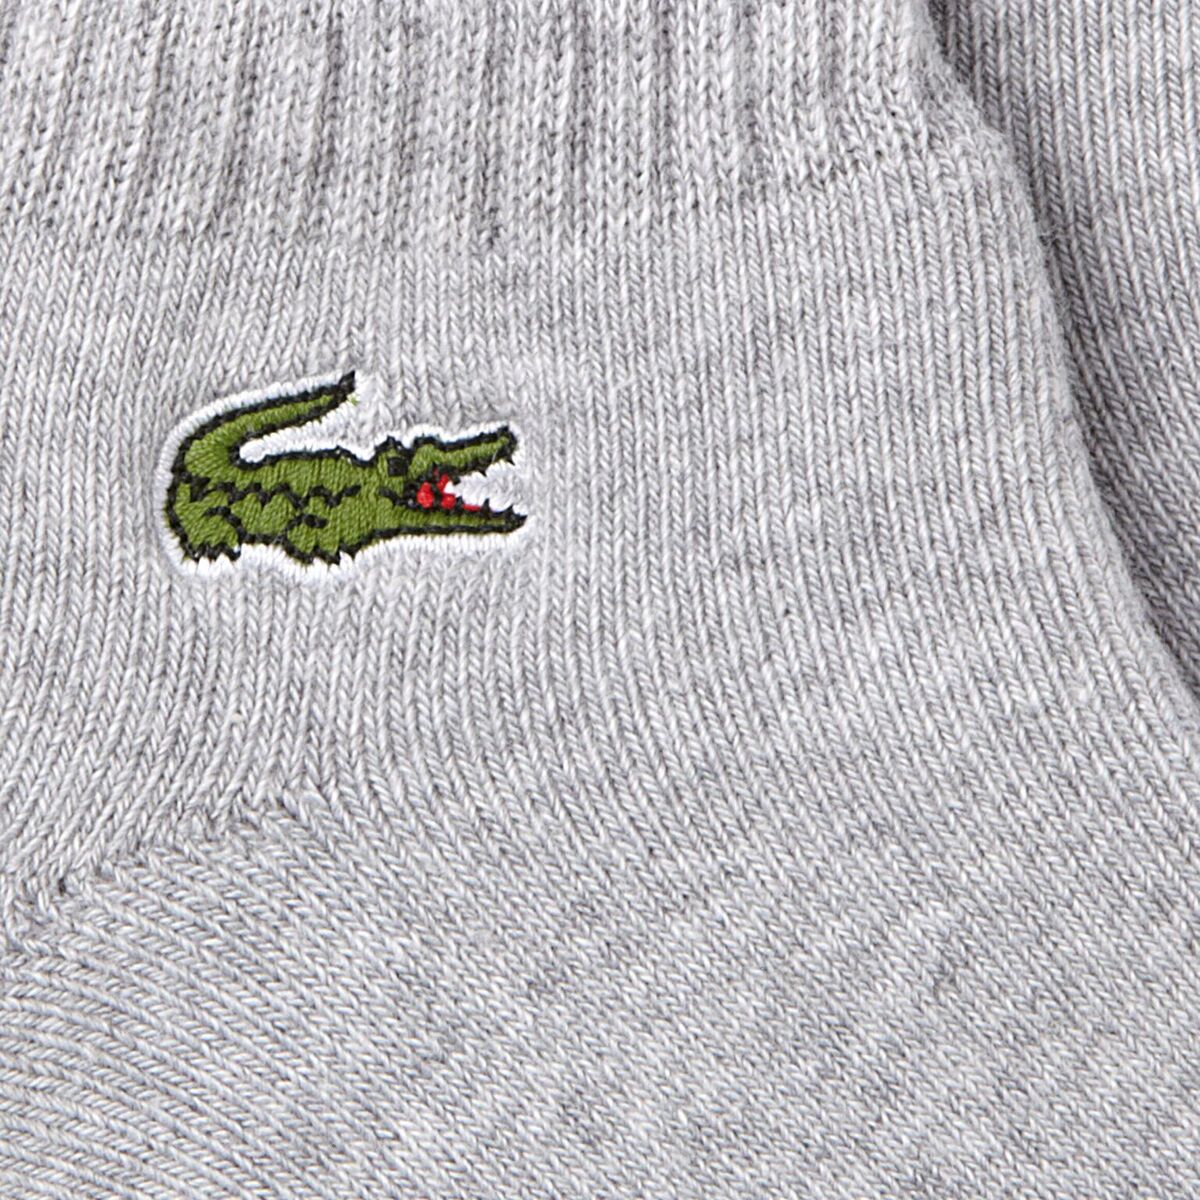 Lacoste High Quilaty Ankle Sport Socks